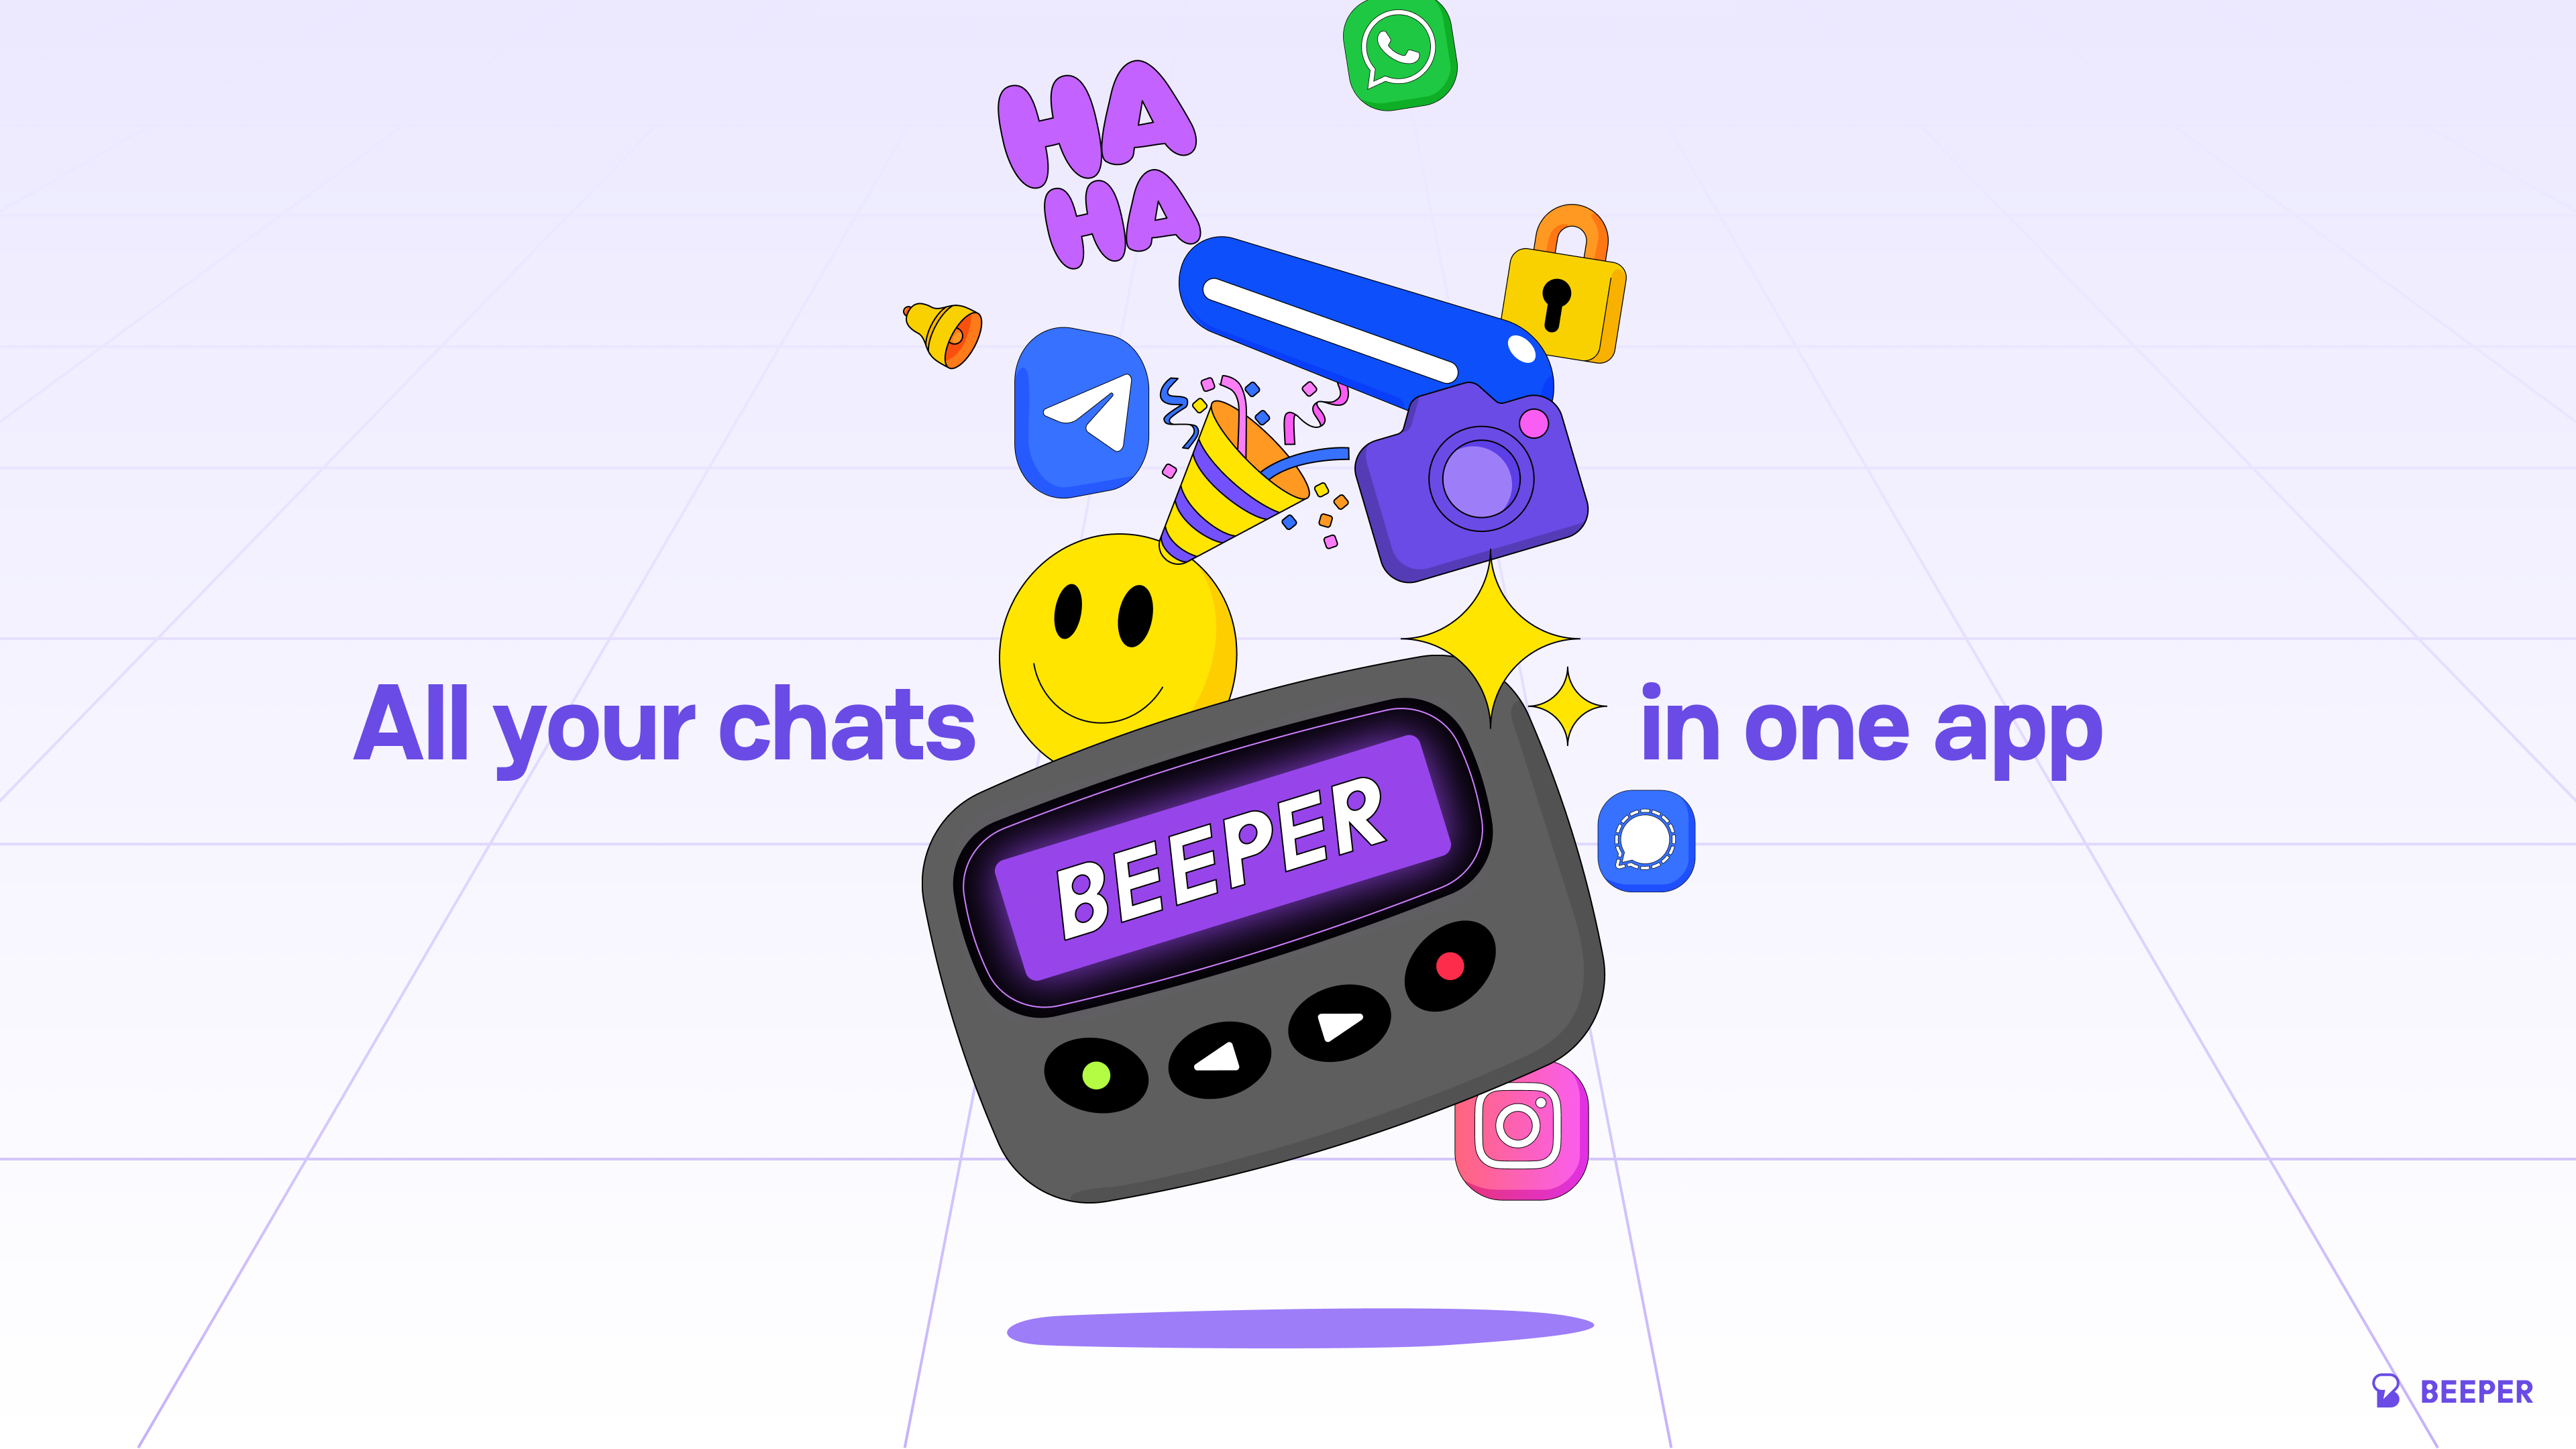 A graphic showing Beeper as an all-in-one app